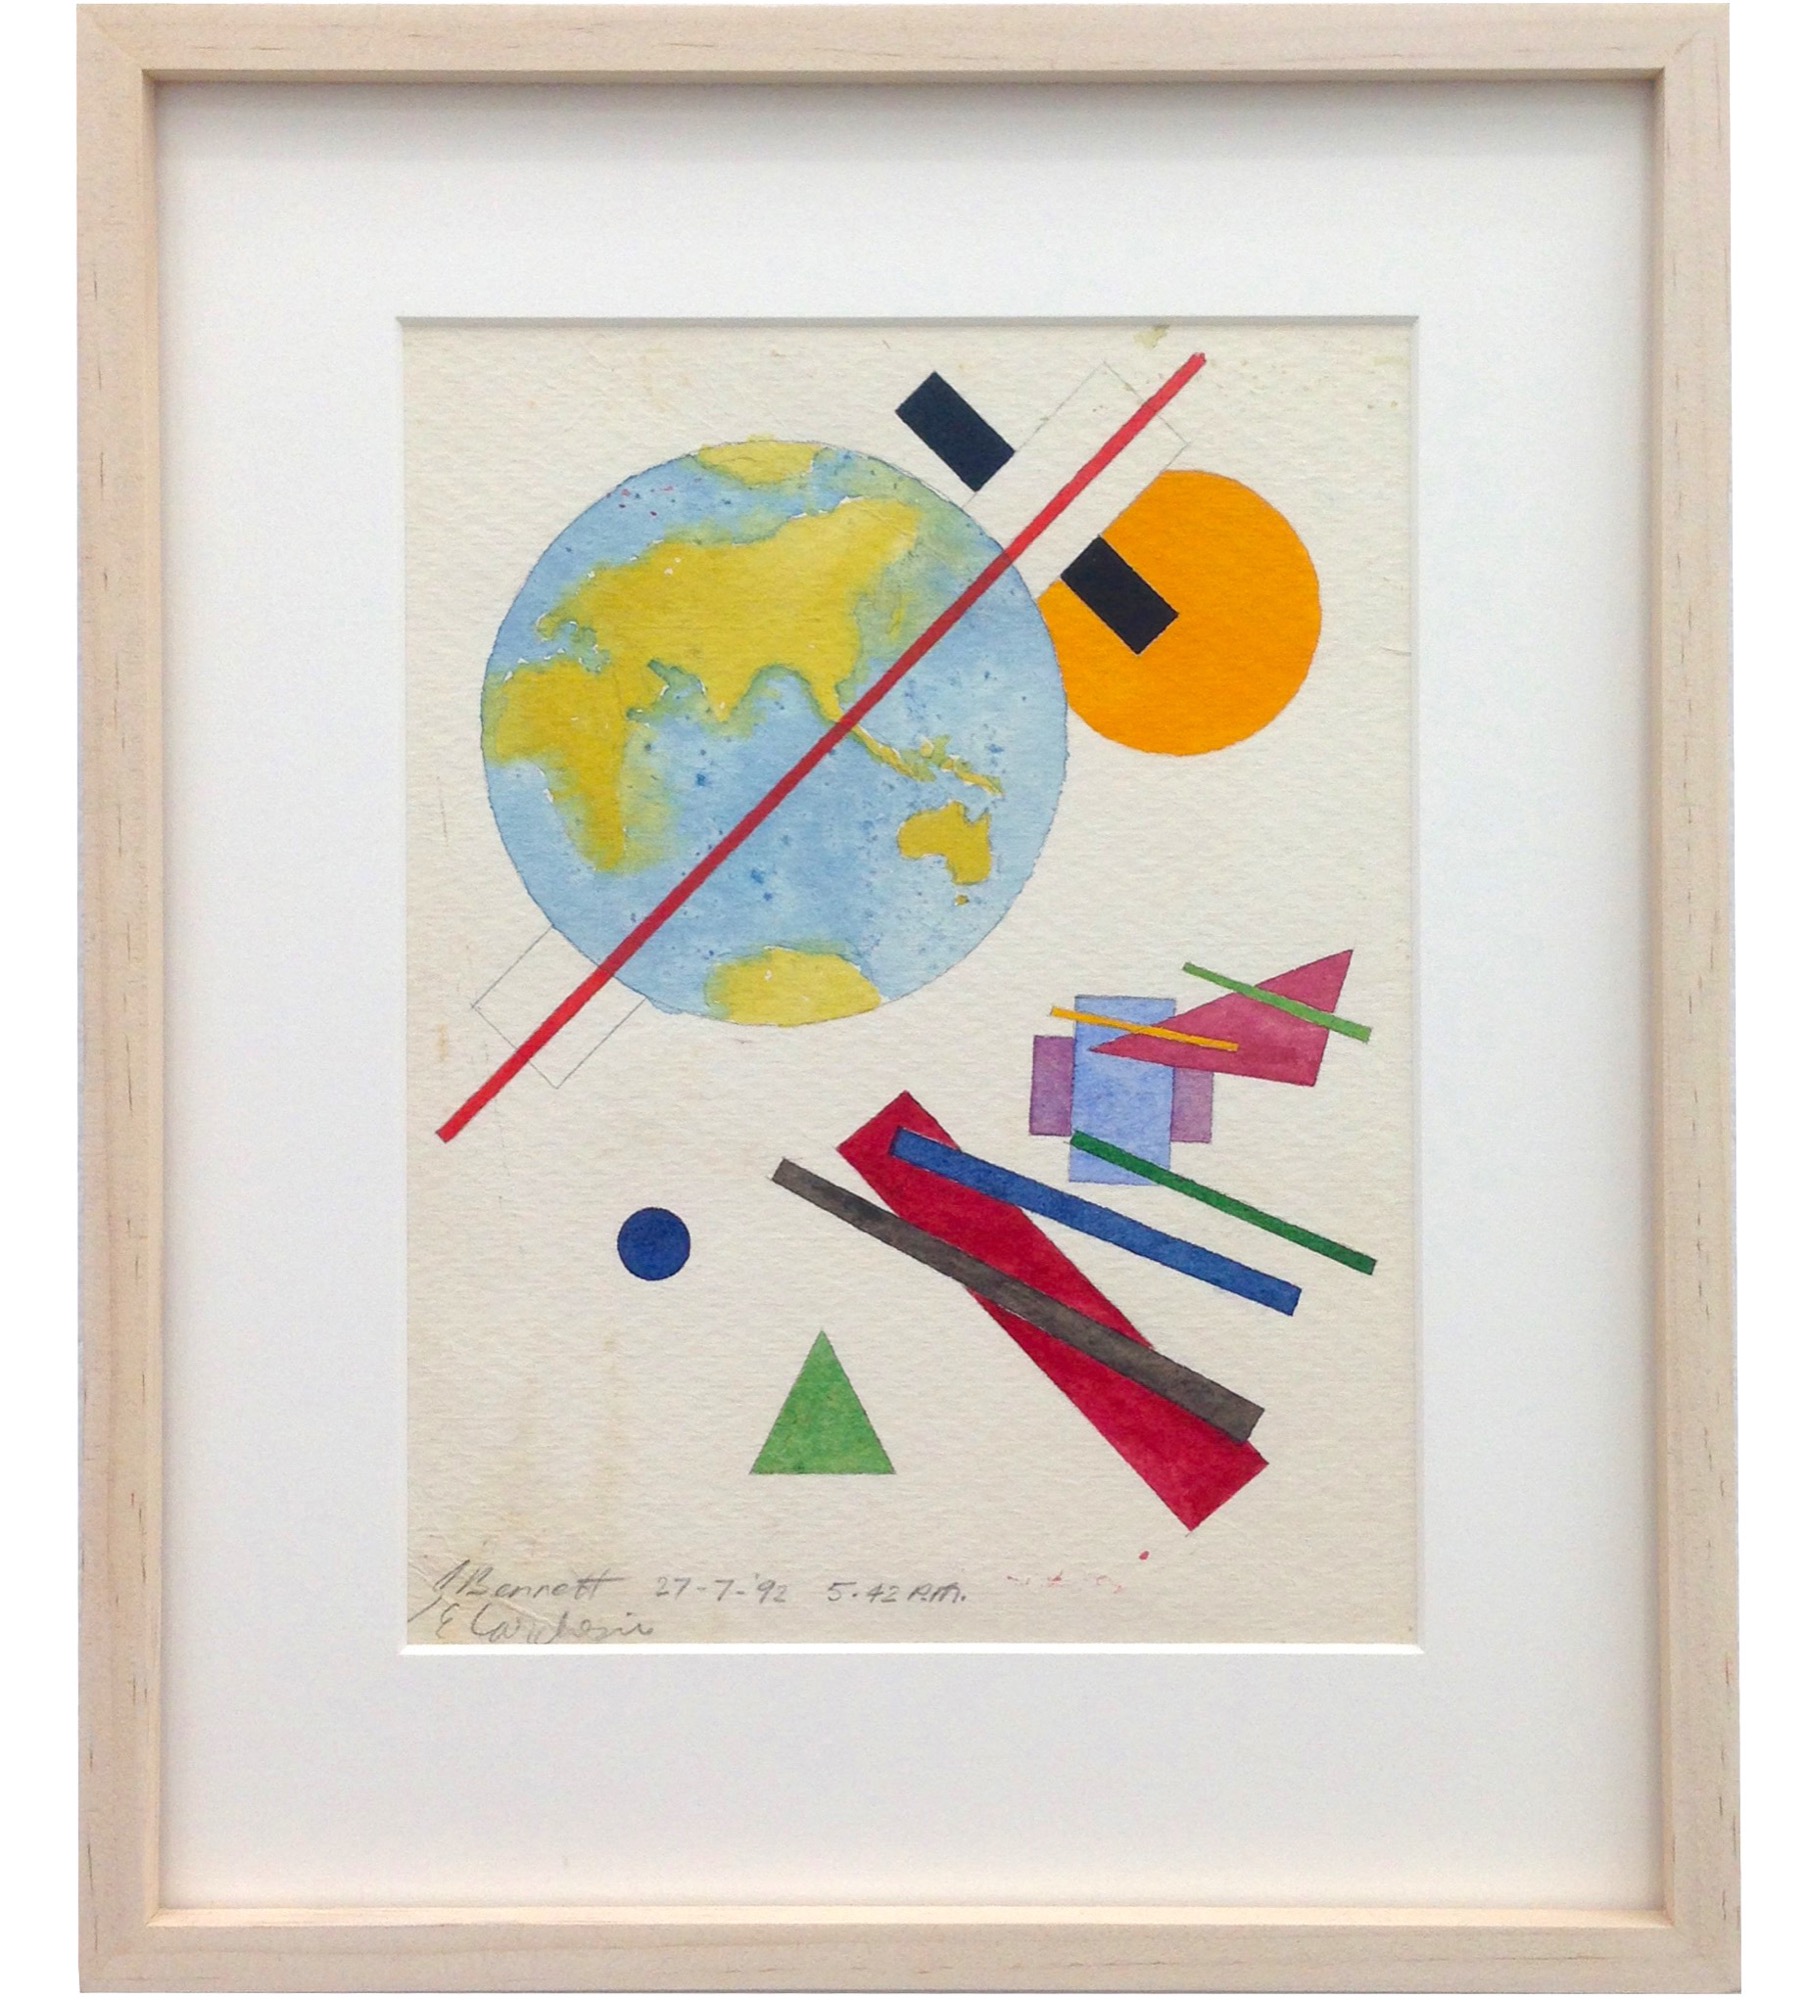 Gordon Bennett and Eugene Carchesio, <em>Untitled</em>, 1992, watercolour on paper. Courtesy the artists and Milani Gallery, Brisbane.